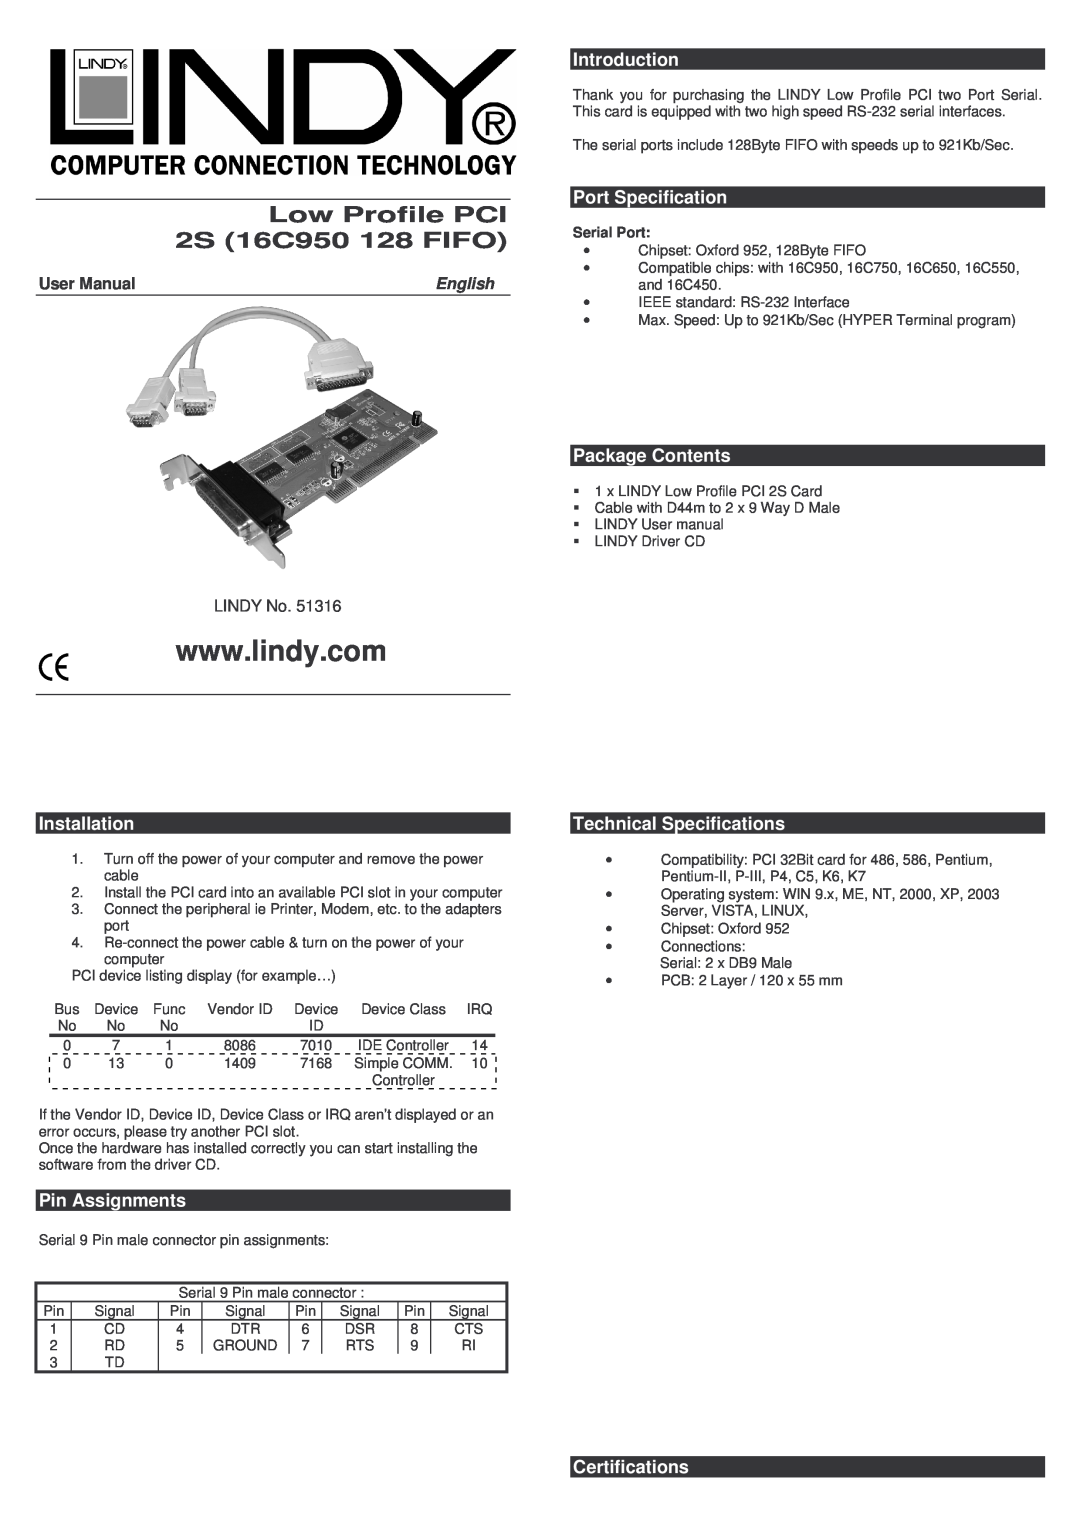 Lindy 51316 technical specifications Installation, Pin Assignments, Introduction, Port Specification, Package Contents 